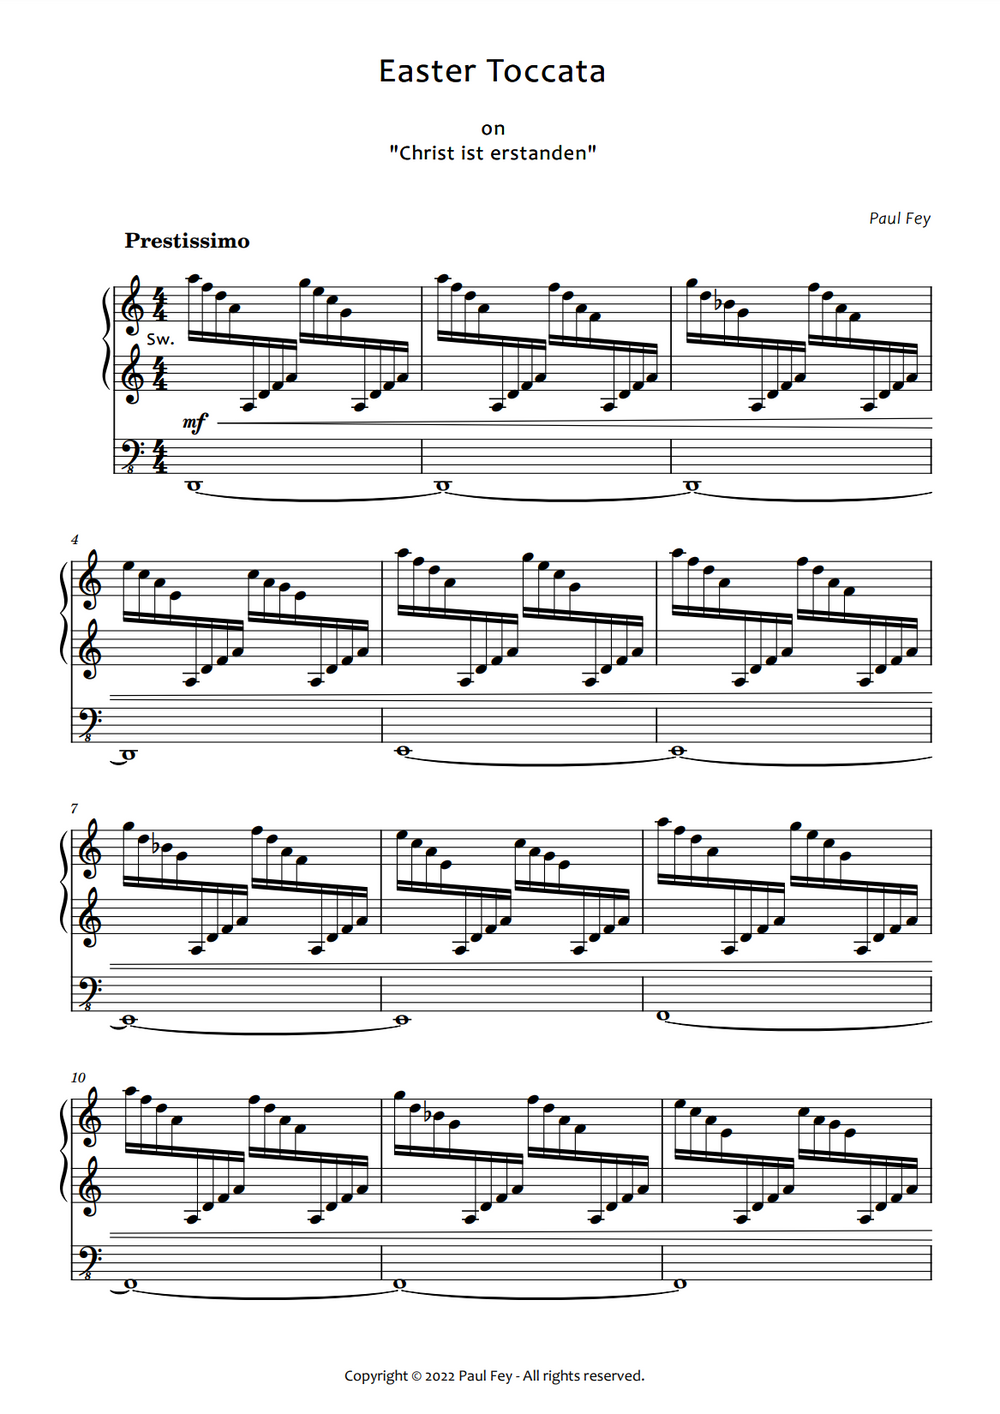 Easter Toccata Sheet Music for Pipe Organ by Paul Fey